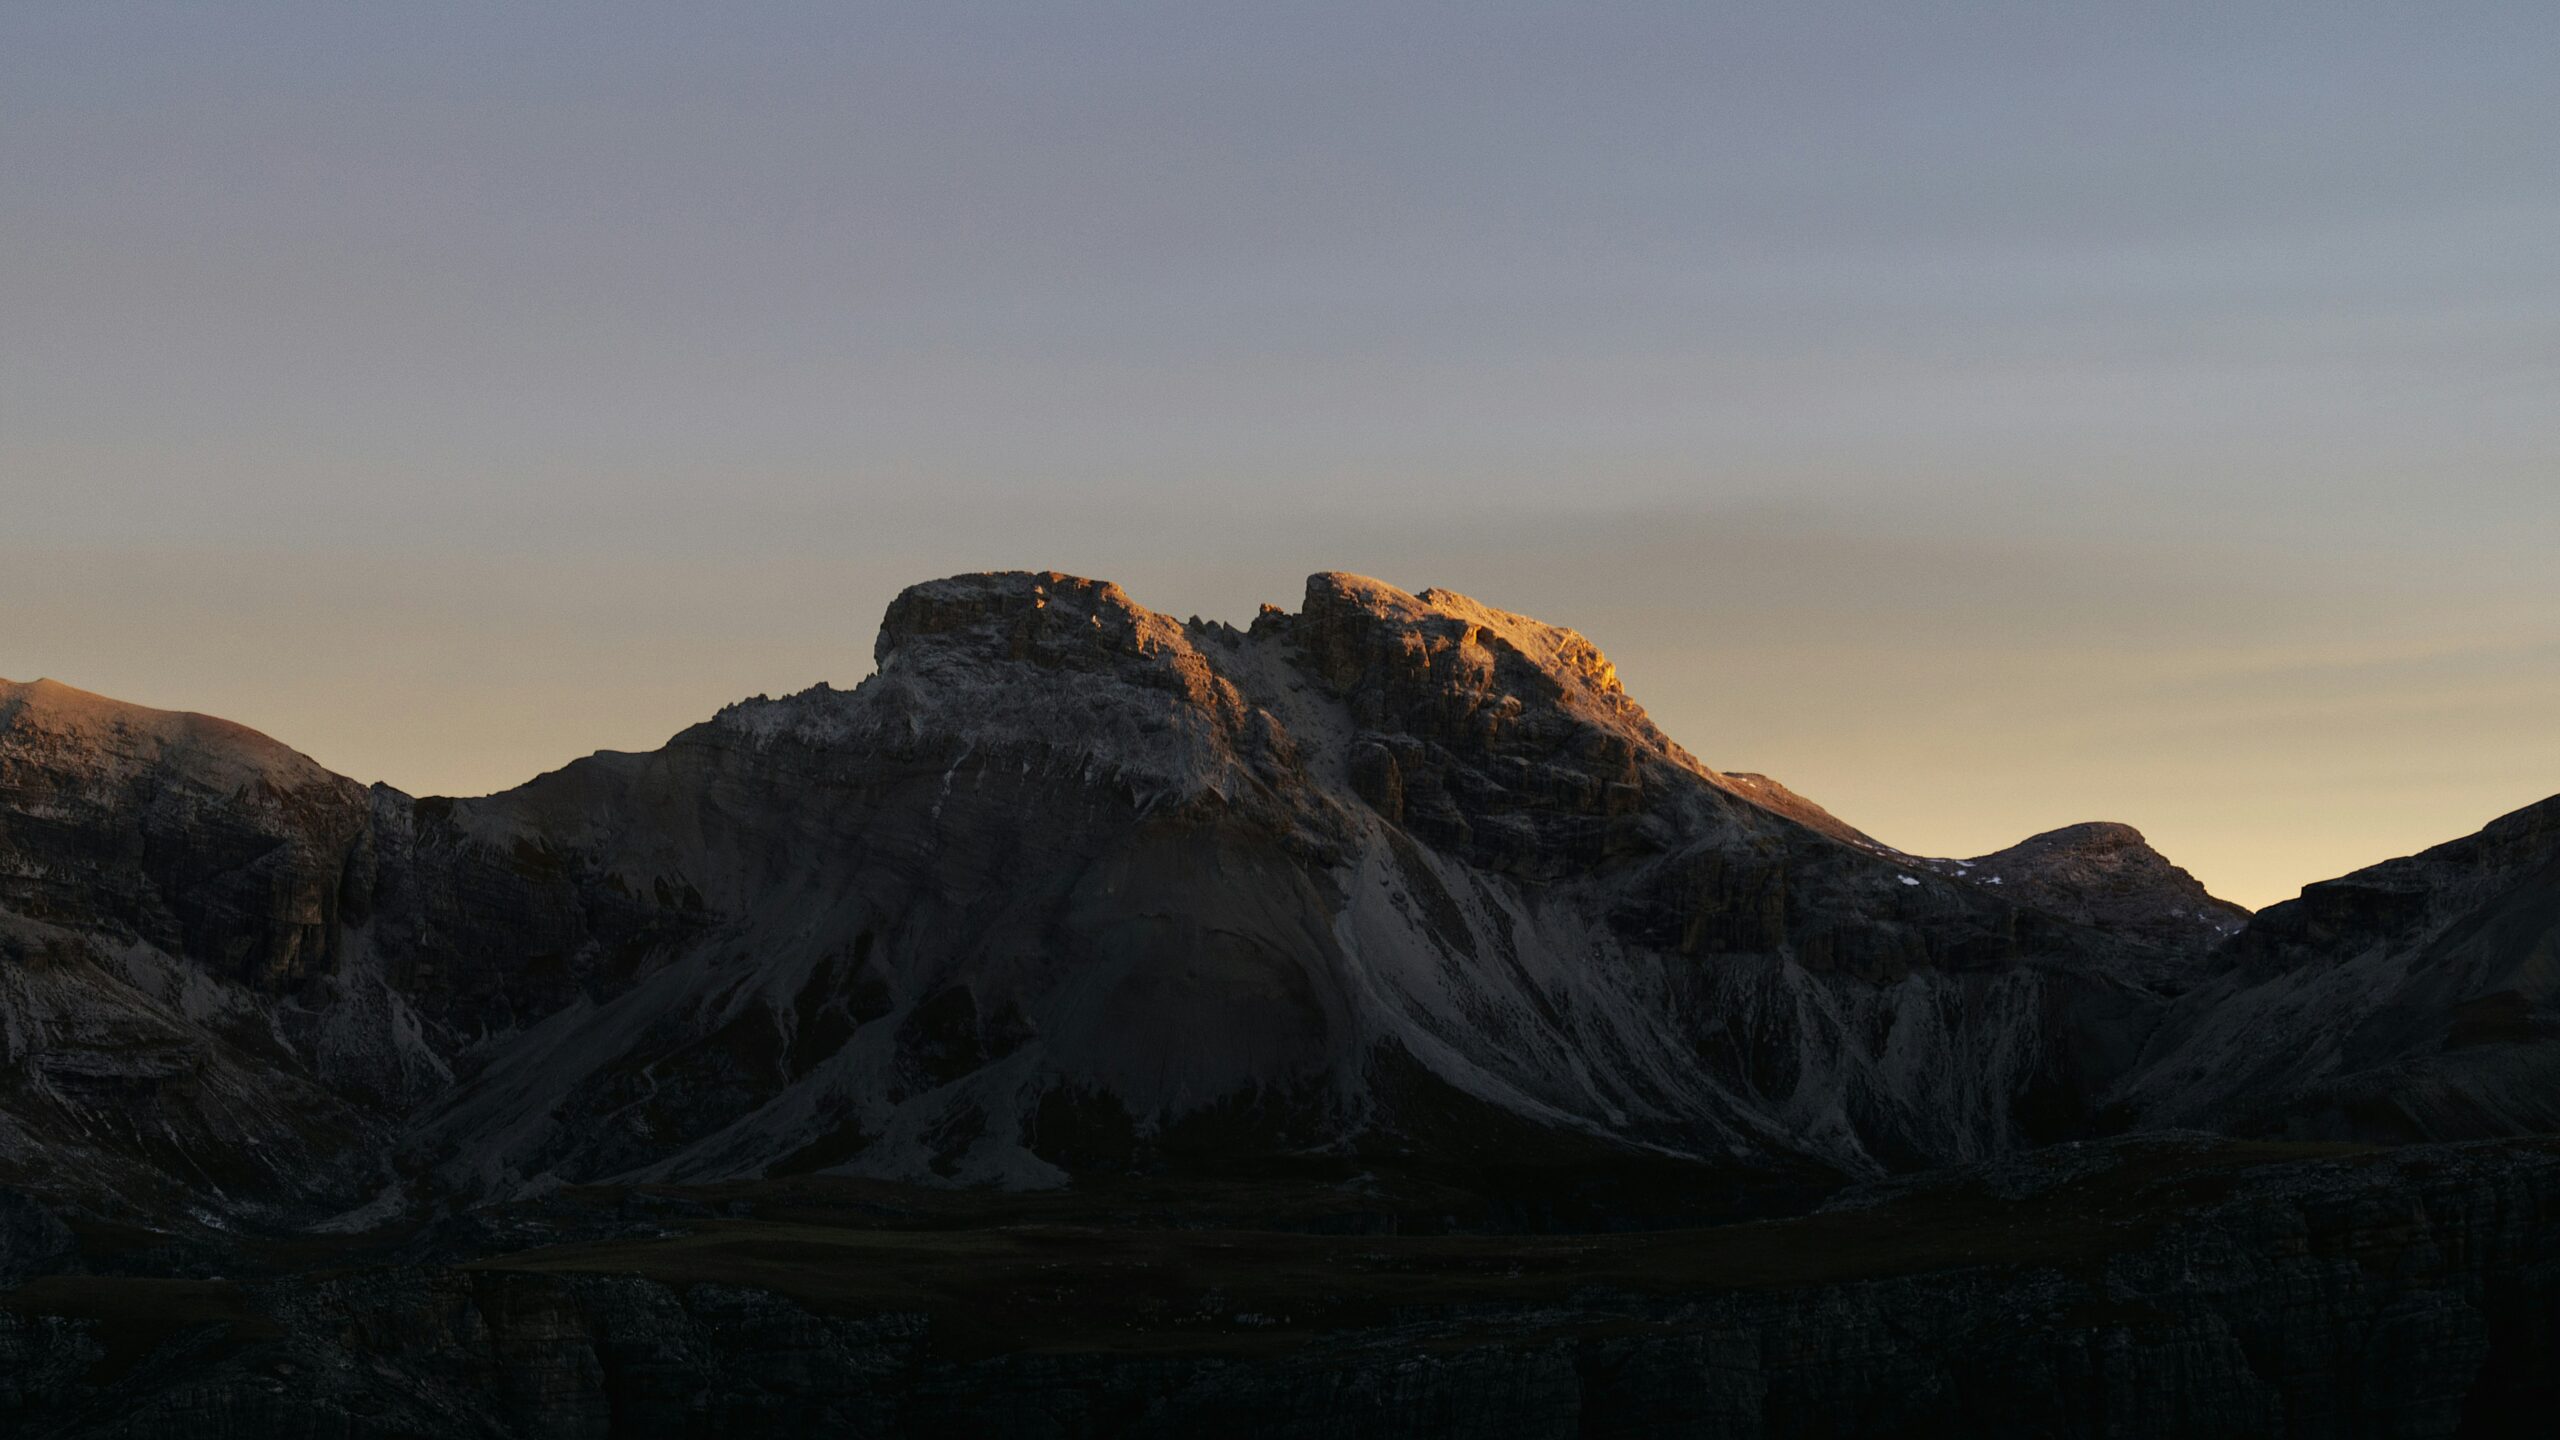 The Dolomites is a UNESCO World Heritage Site in Italy. 
Pictured: the Dolomite mountains during sunset